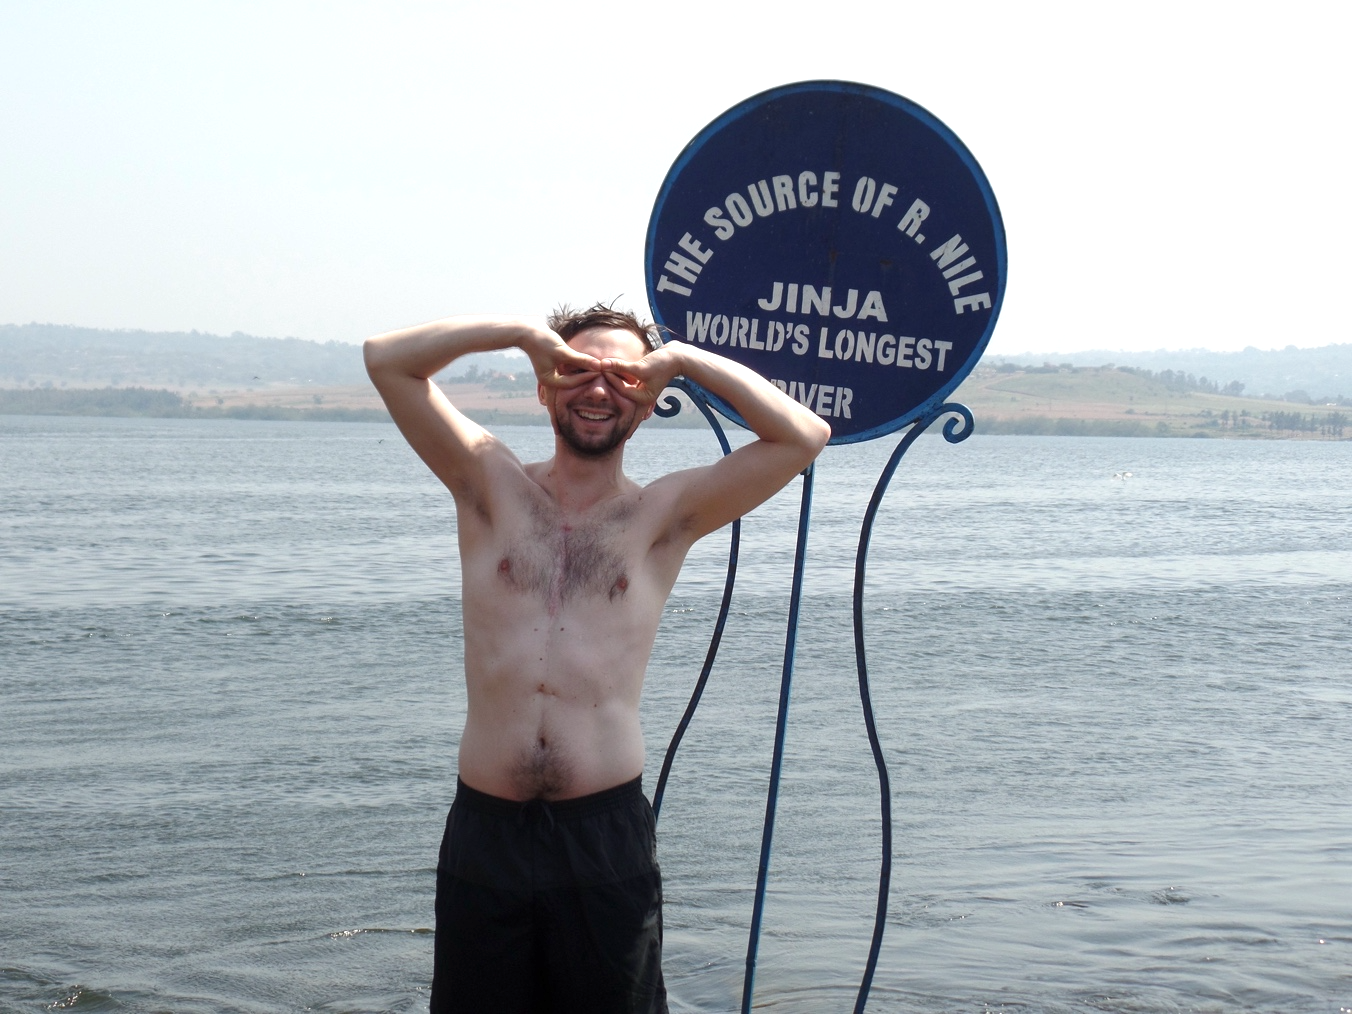 Stephan poses, making a goofy glasses shape with his fingers, in front of a sign reading "The source of R. Nile, Jinja, World's Longest River." The river flows behind him.